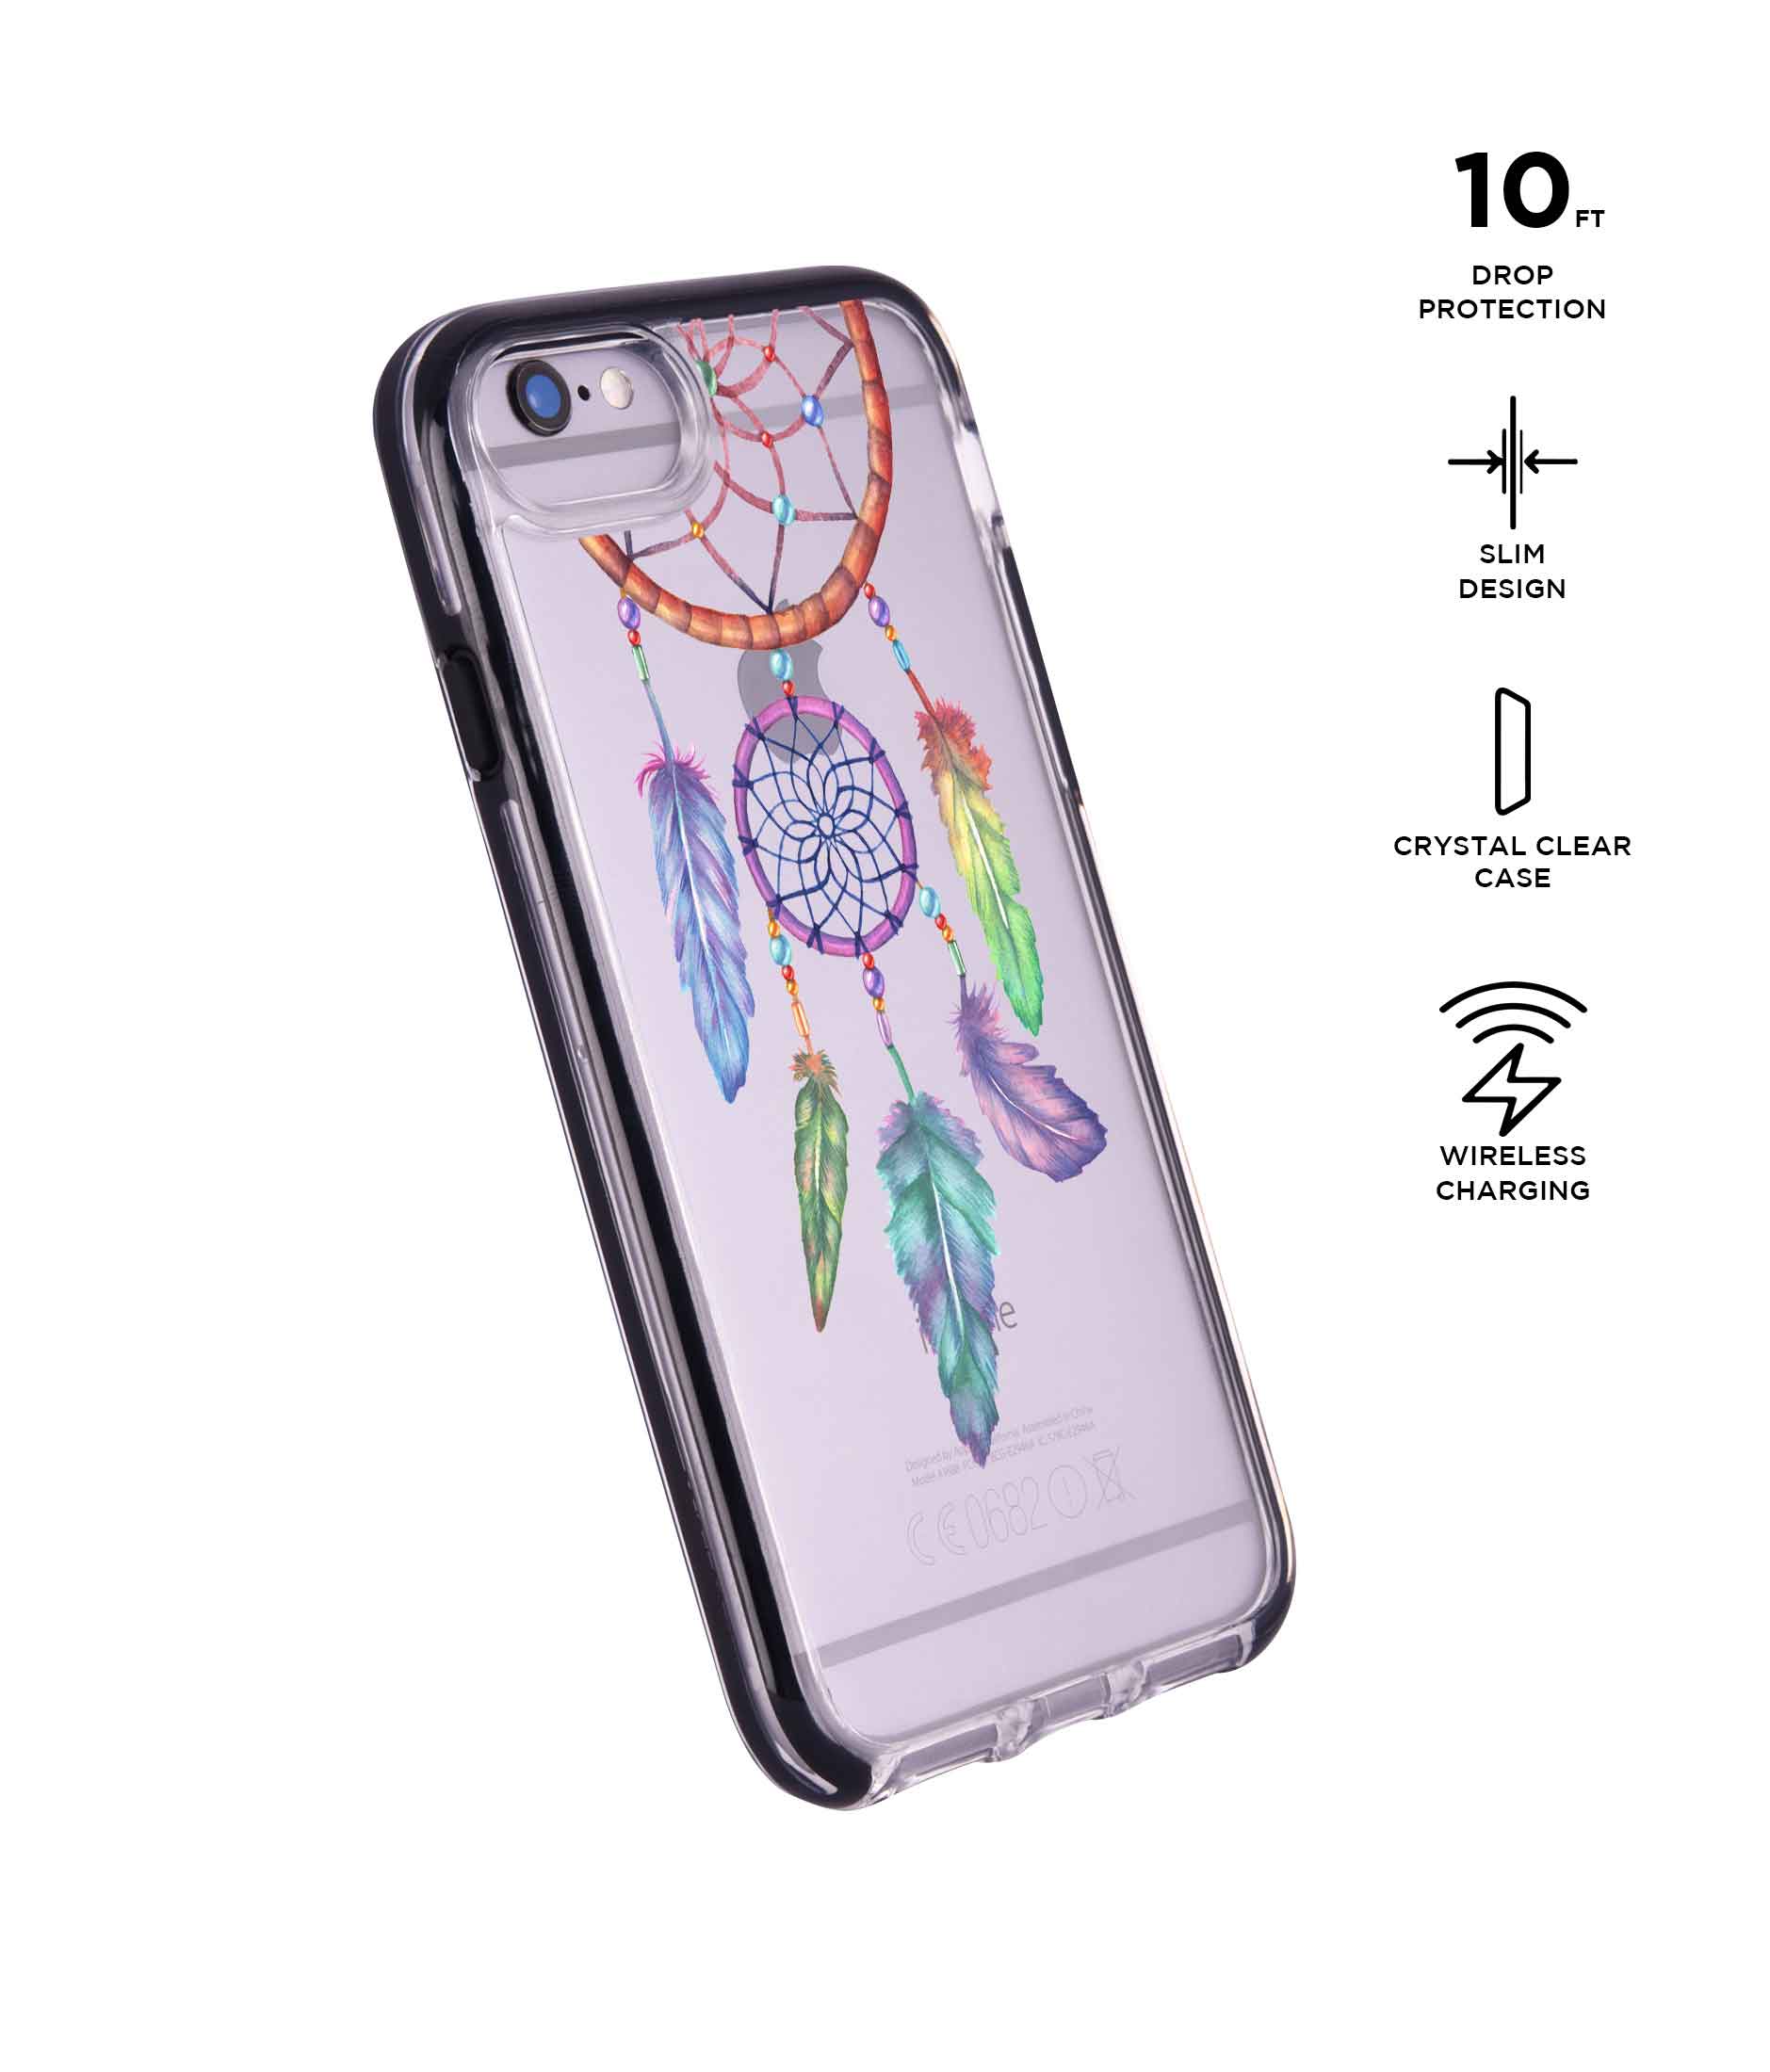 Dream Catcher Feathers - Extreme Phone Case for iPhone 6